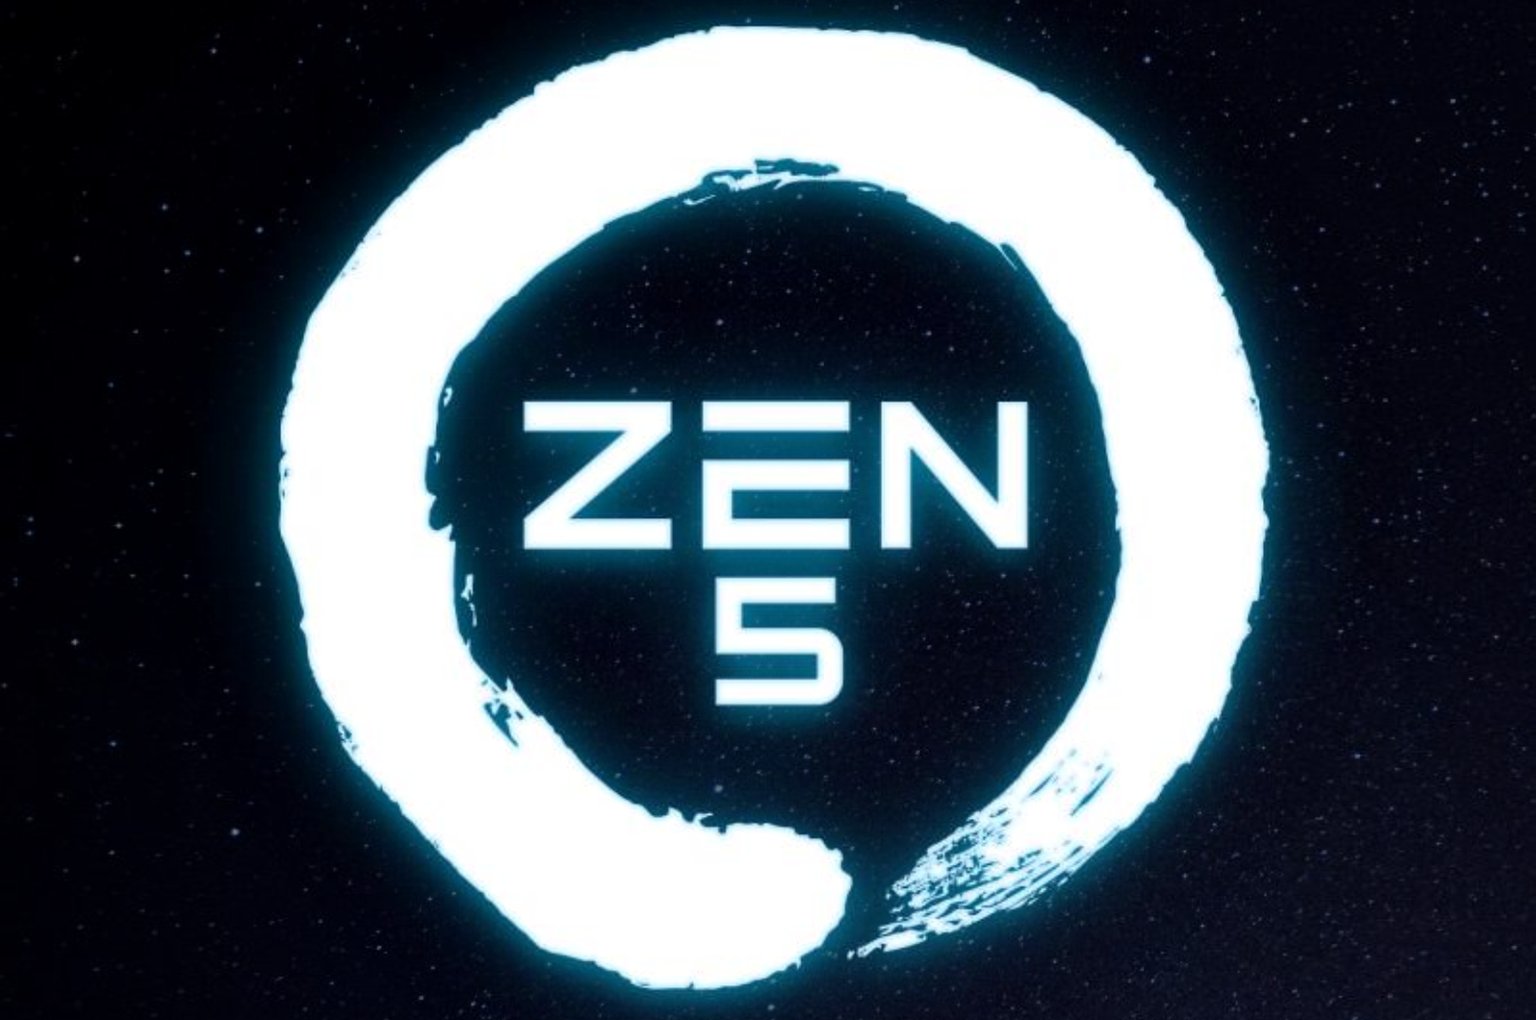 AMD’s Zen 5 Ryzen CPUs are on track for launch this year